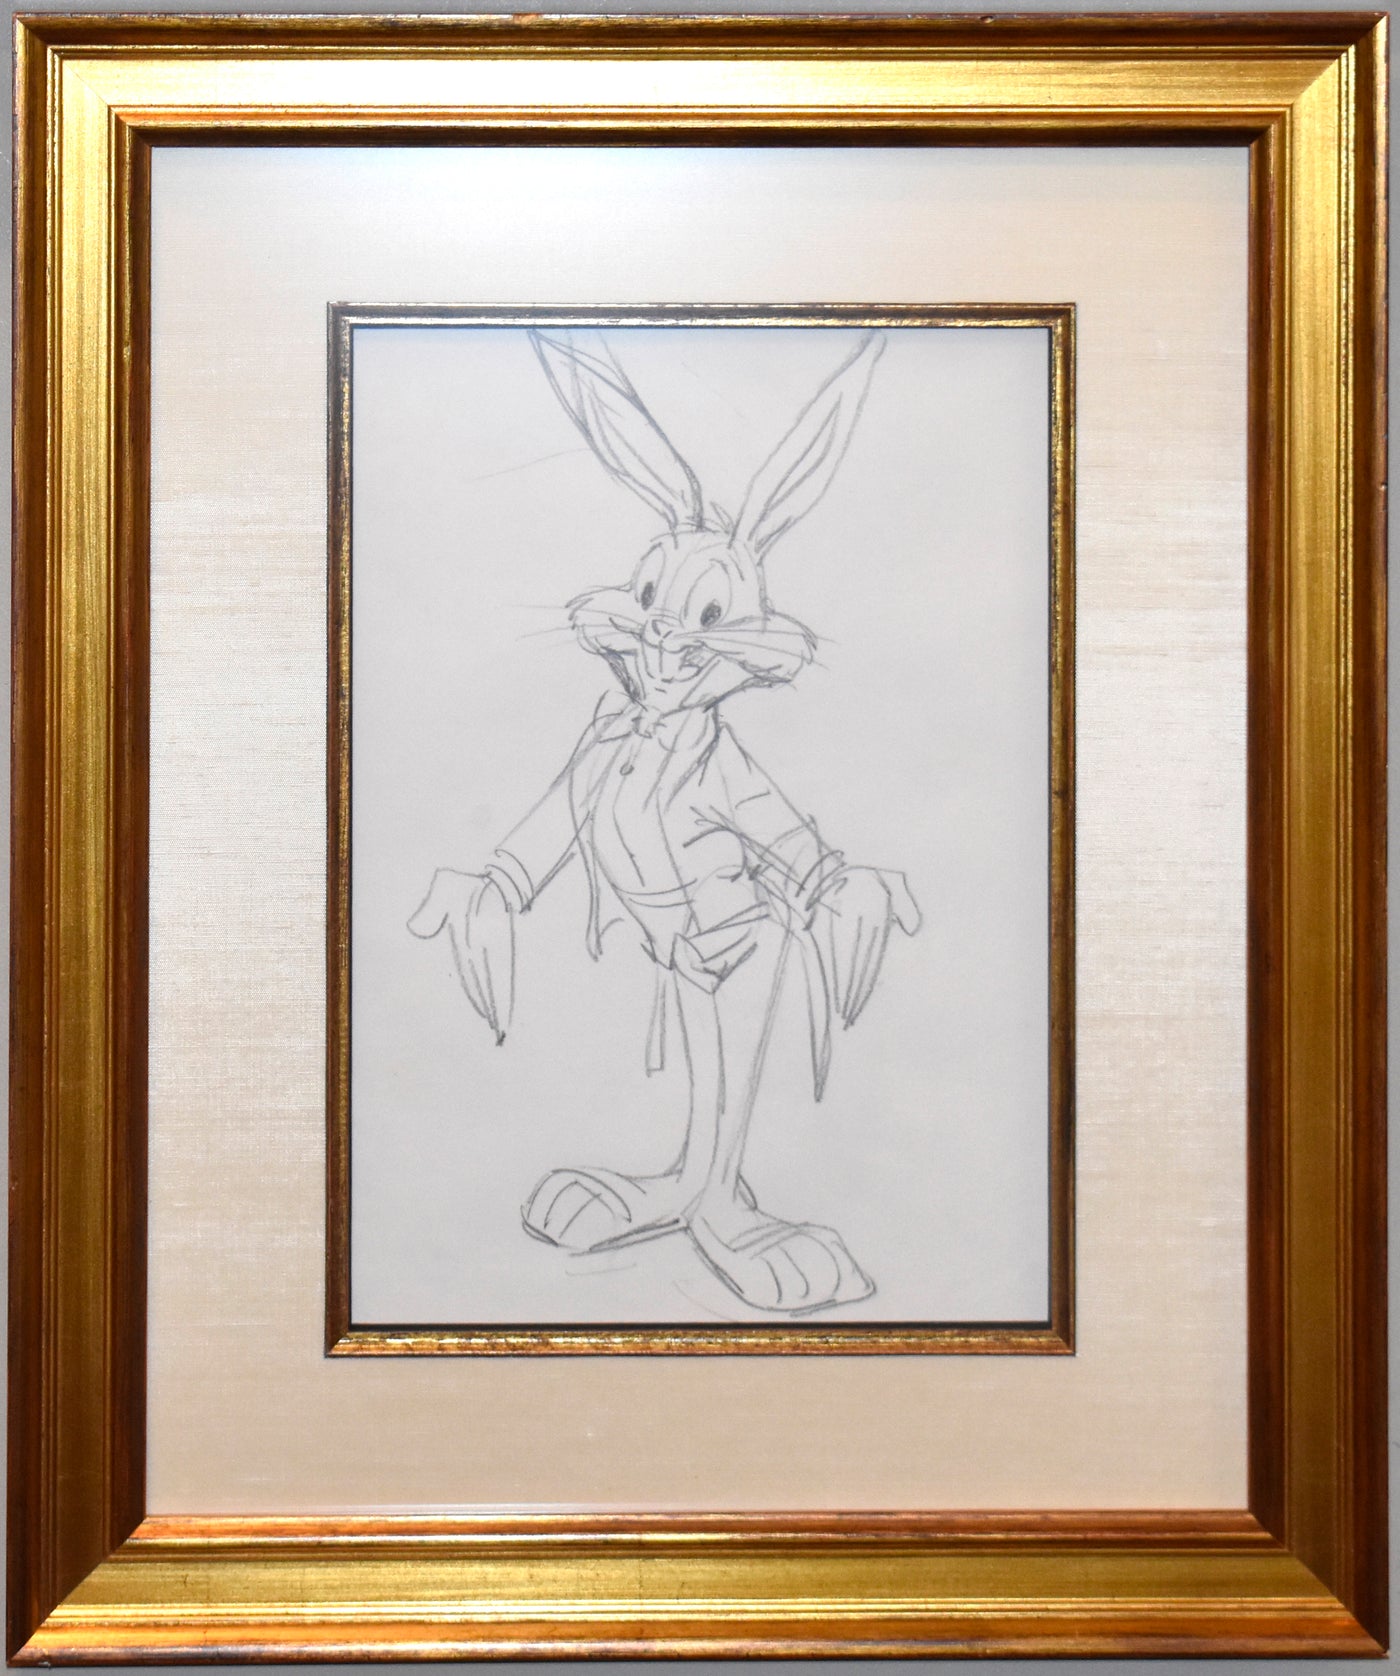 Original Warner Brothers Animation Drawing Featuring Bugs Bunny